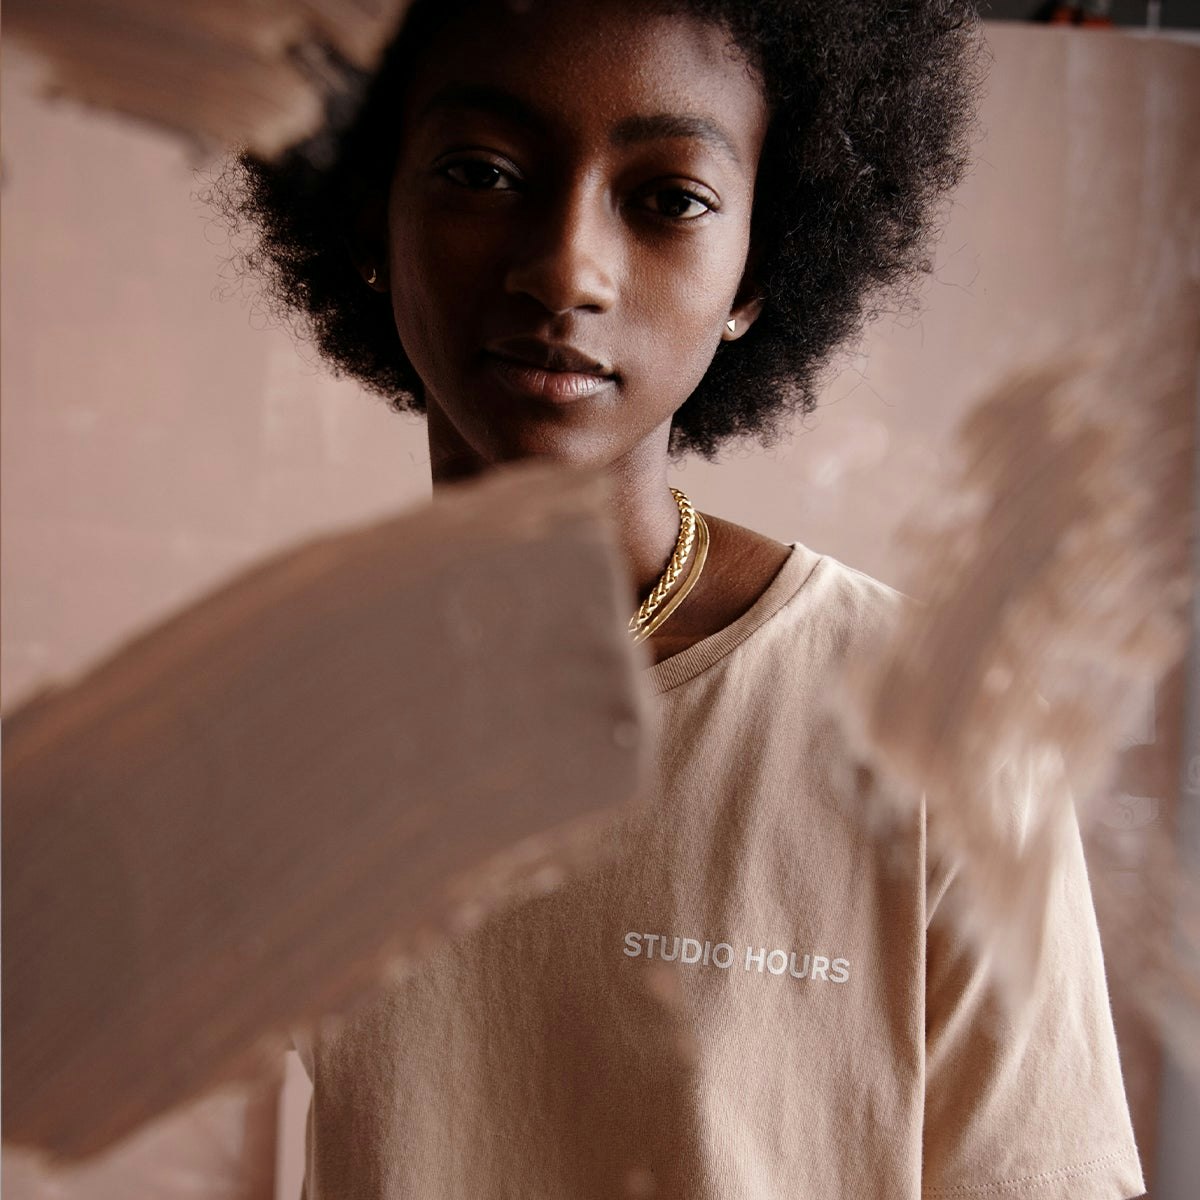 A person wearing a STUDIO HOURS Tshirt from the Backdrop x Madewell collection